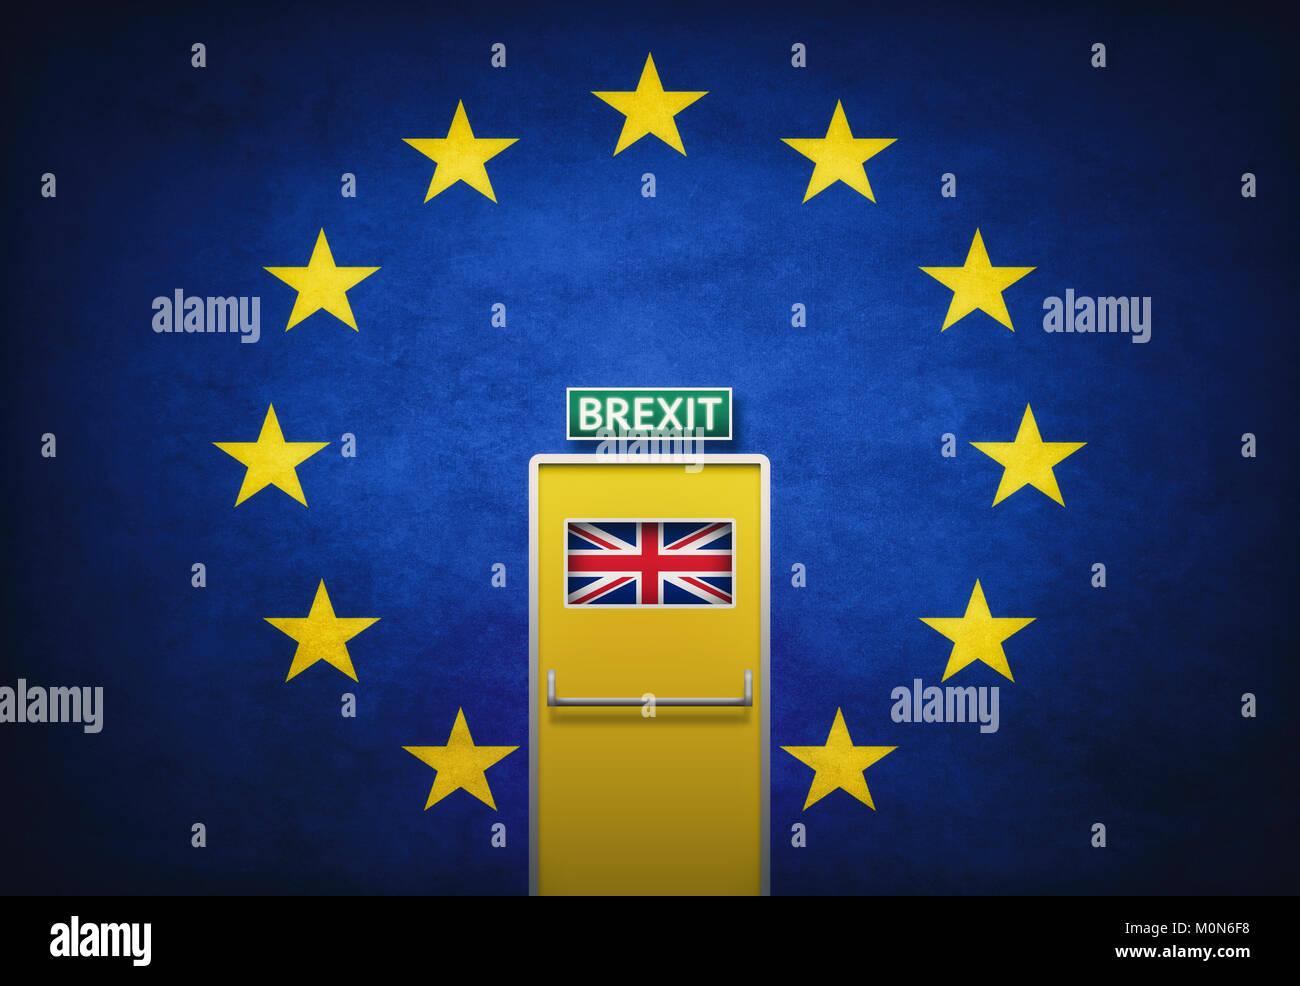 Brexit concept illustration with european flag and exit door Stock Photo